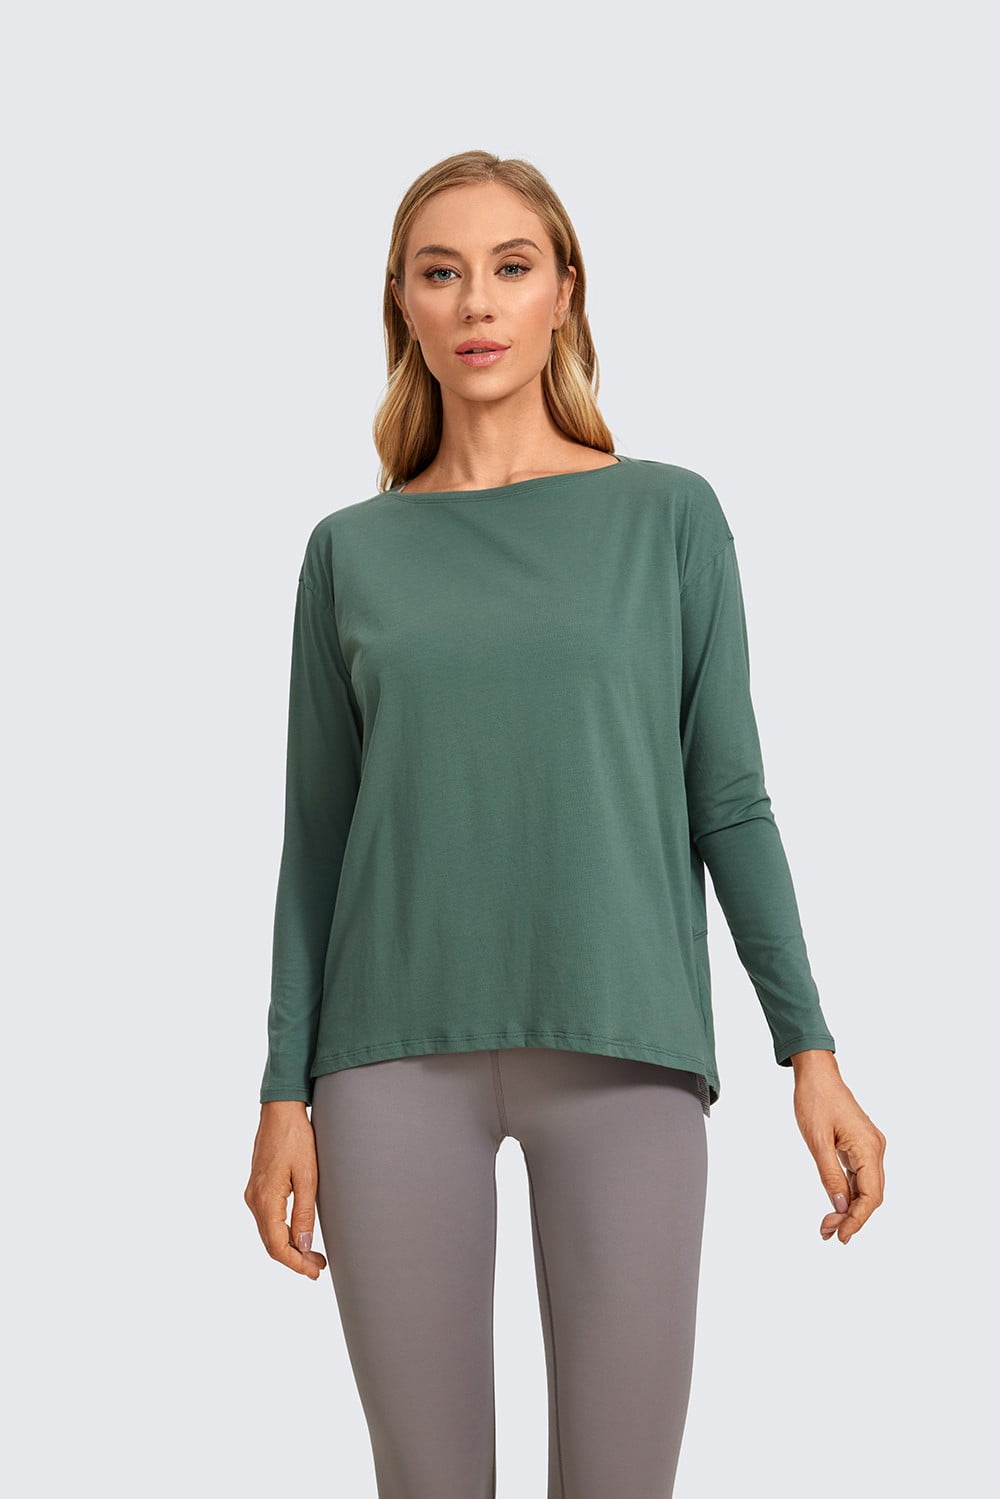 CRZ YOGA Long Sleeve Shirts for Women Loose Fit Pima Cotton Casual